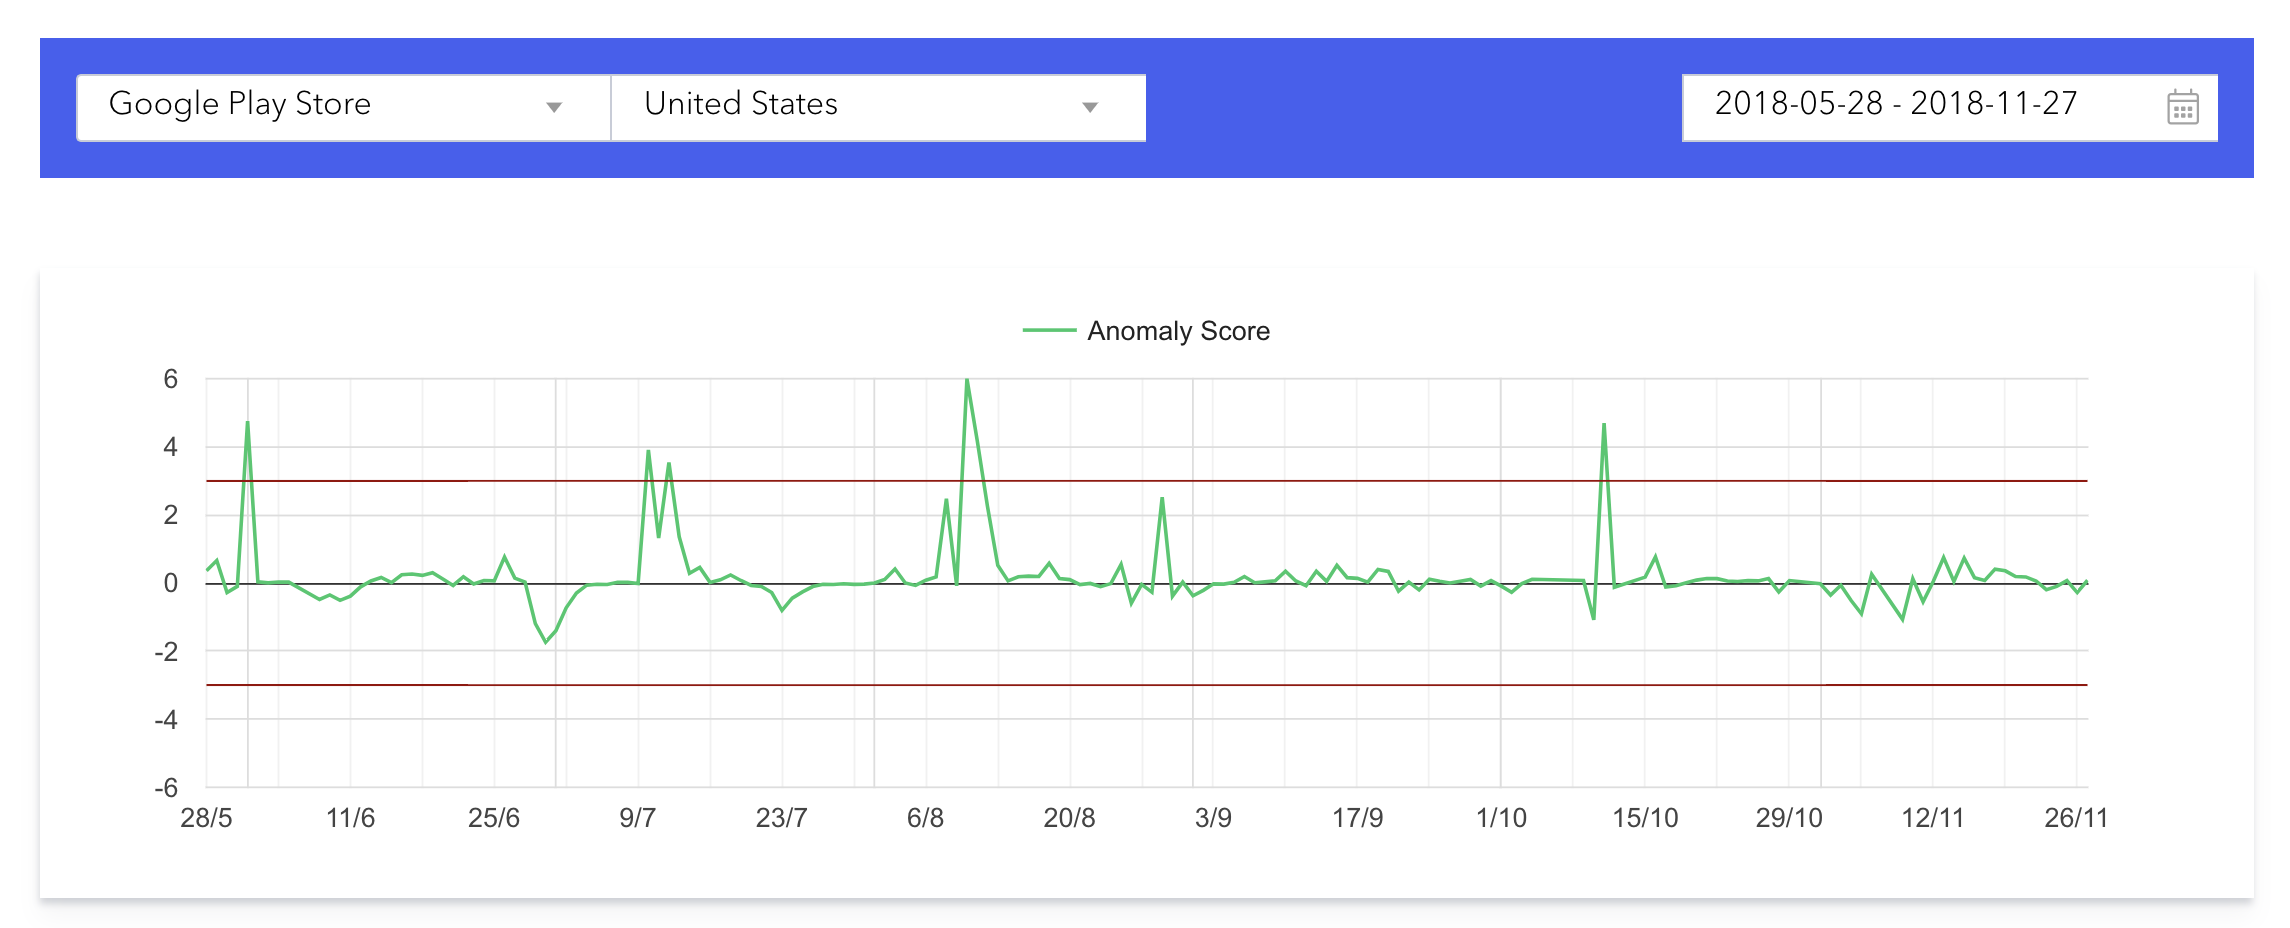 The keyword ranking algorithm changes detected in the US Play Store over the last 6 months 